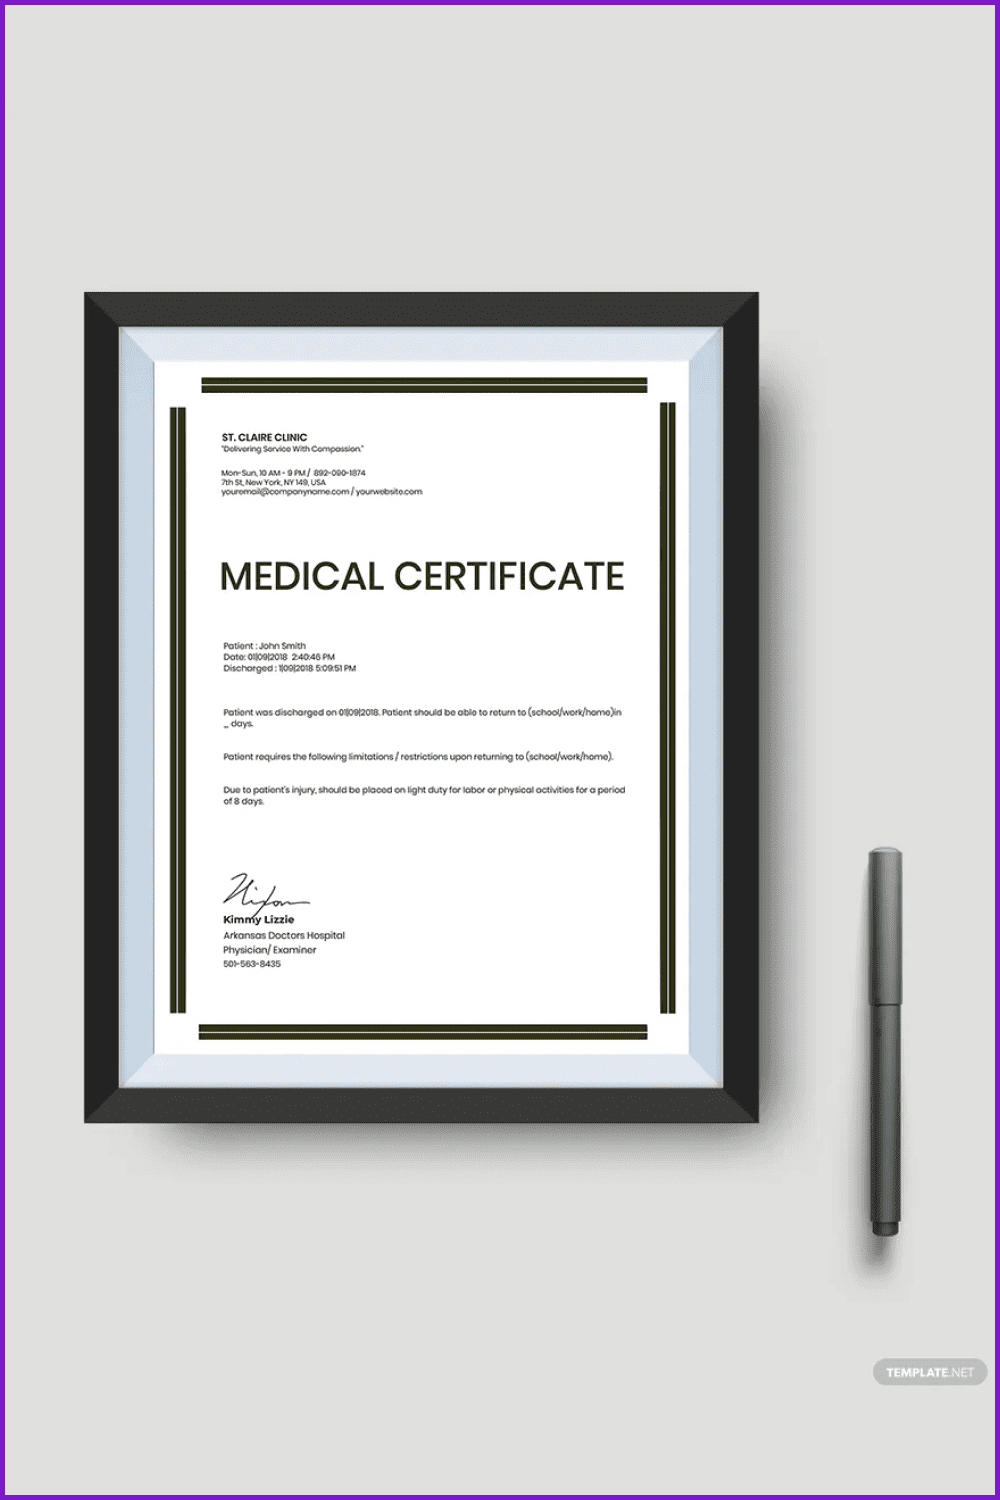 Medical Certificate Template for Injury.